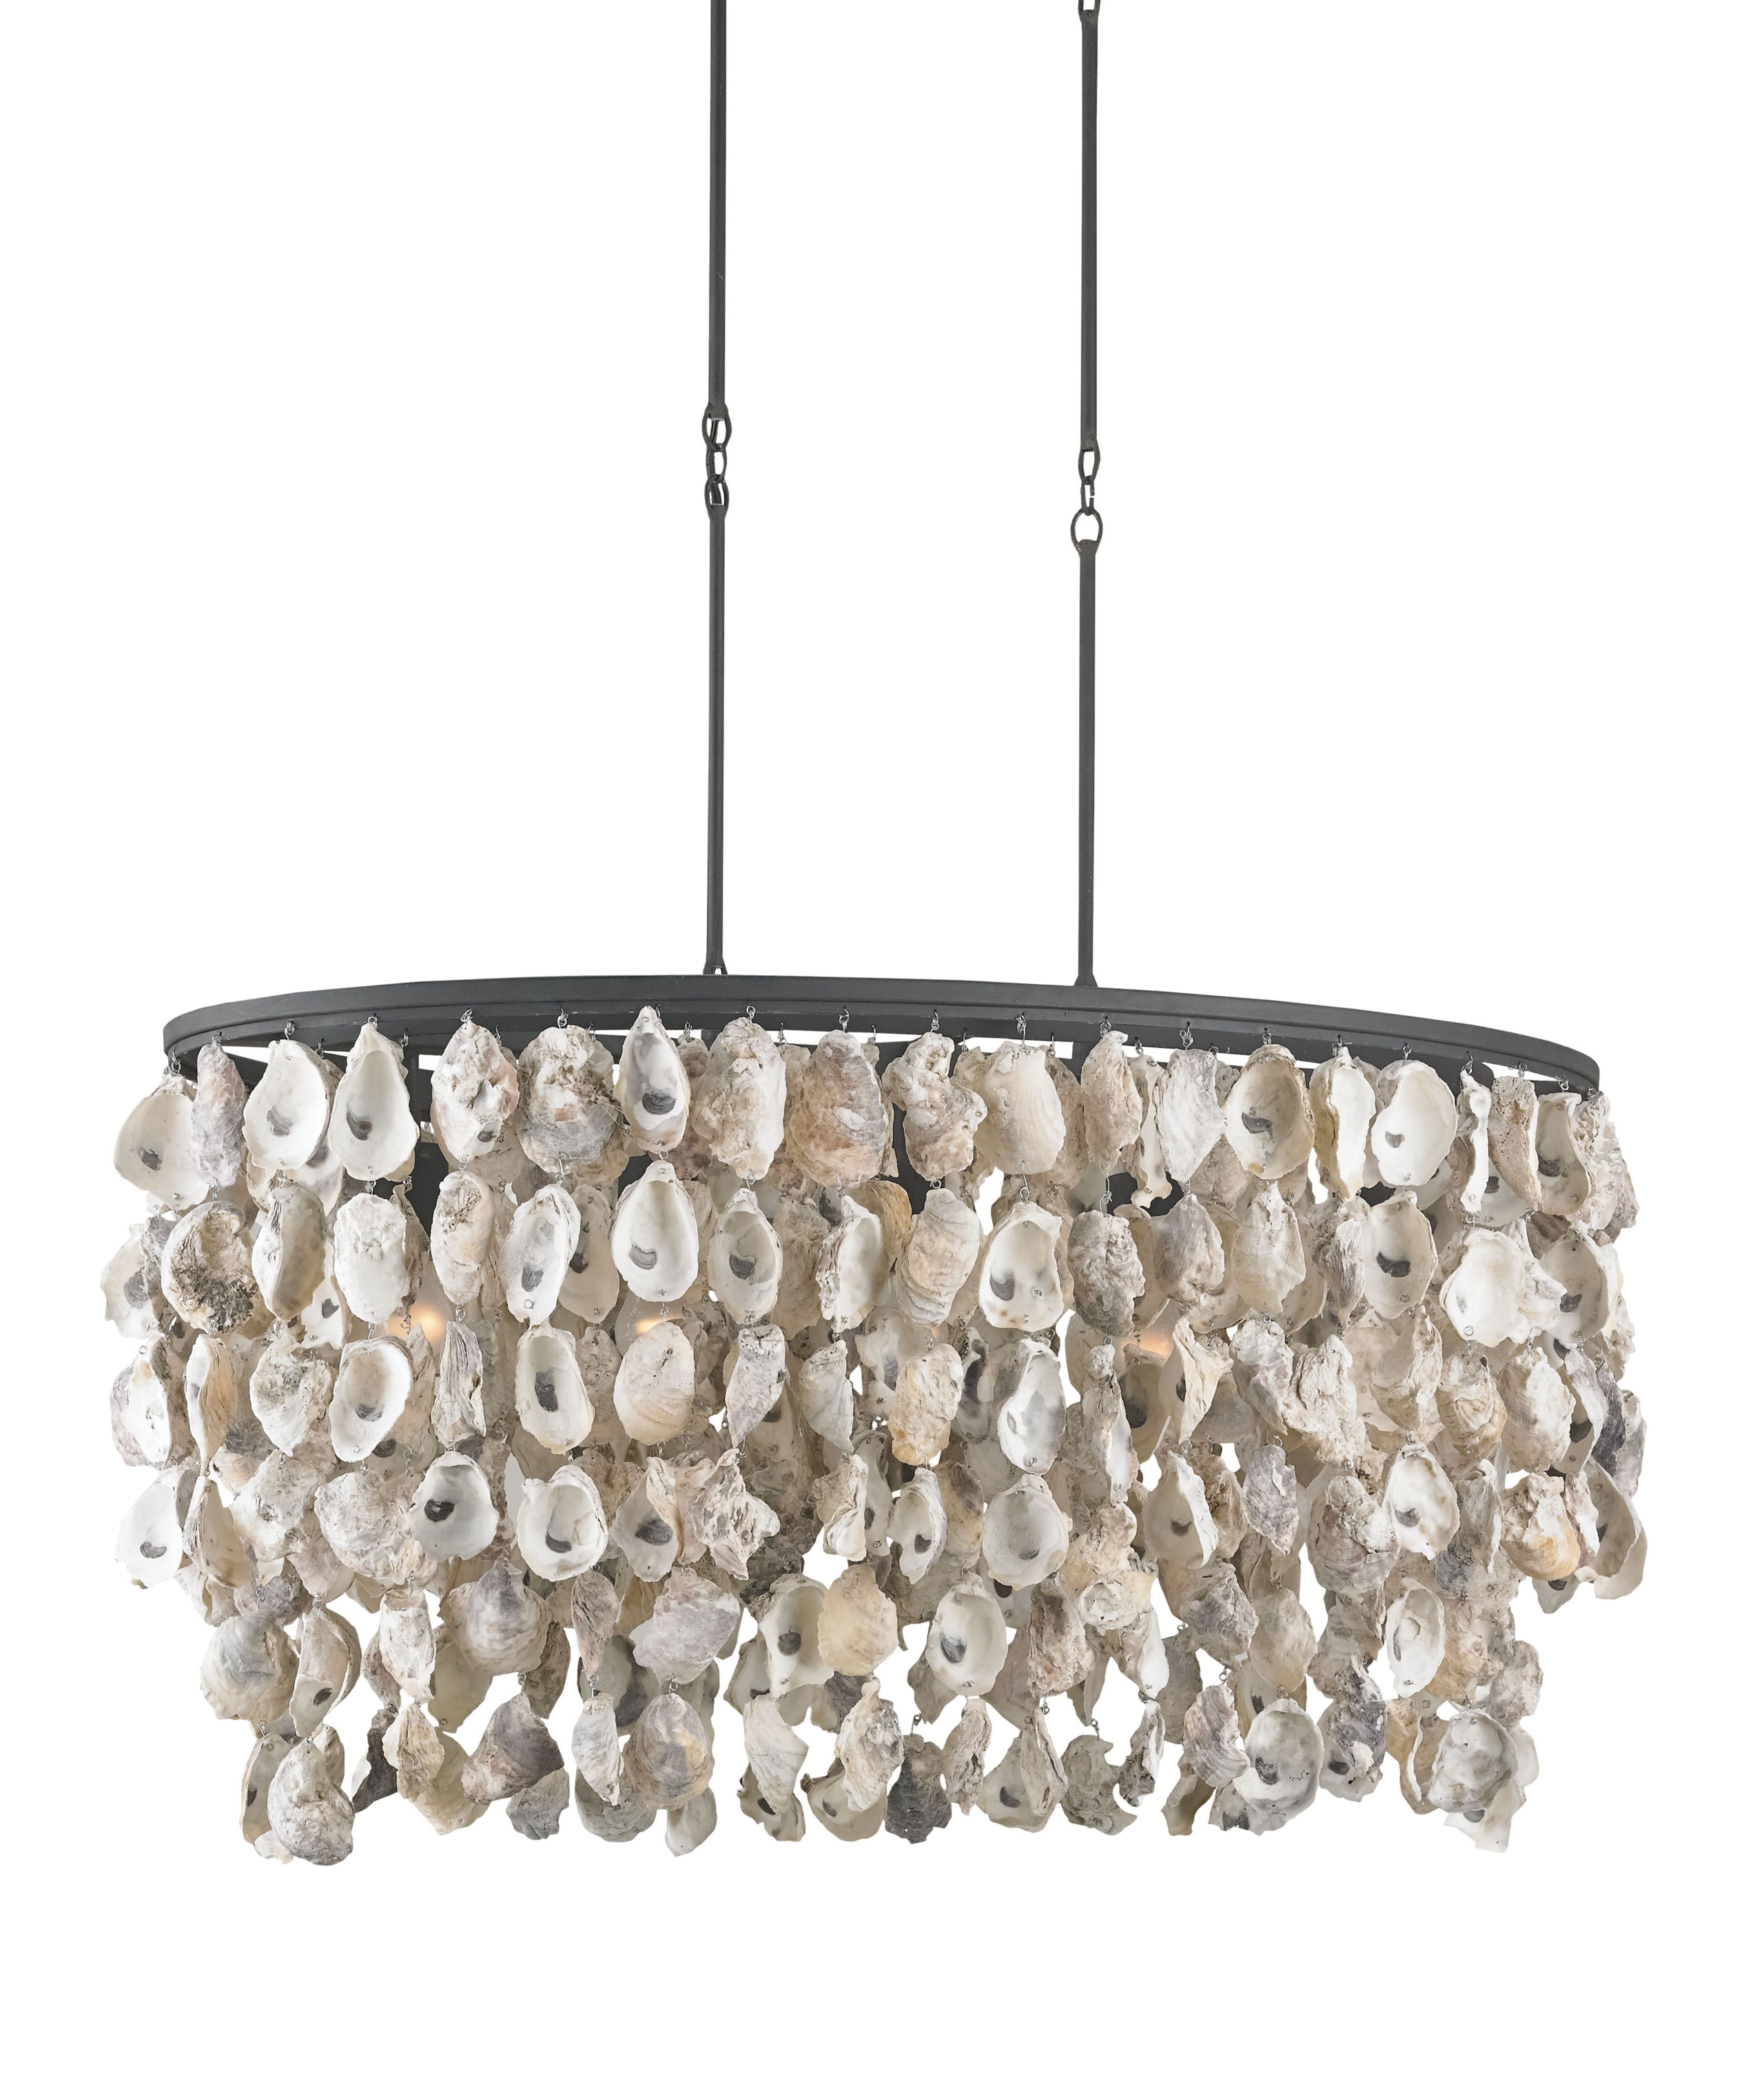 Oyster shell chandelier 31